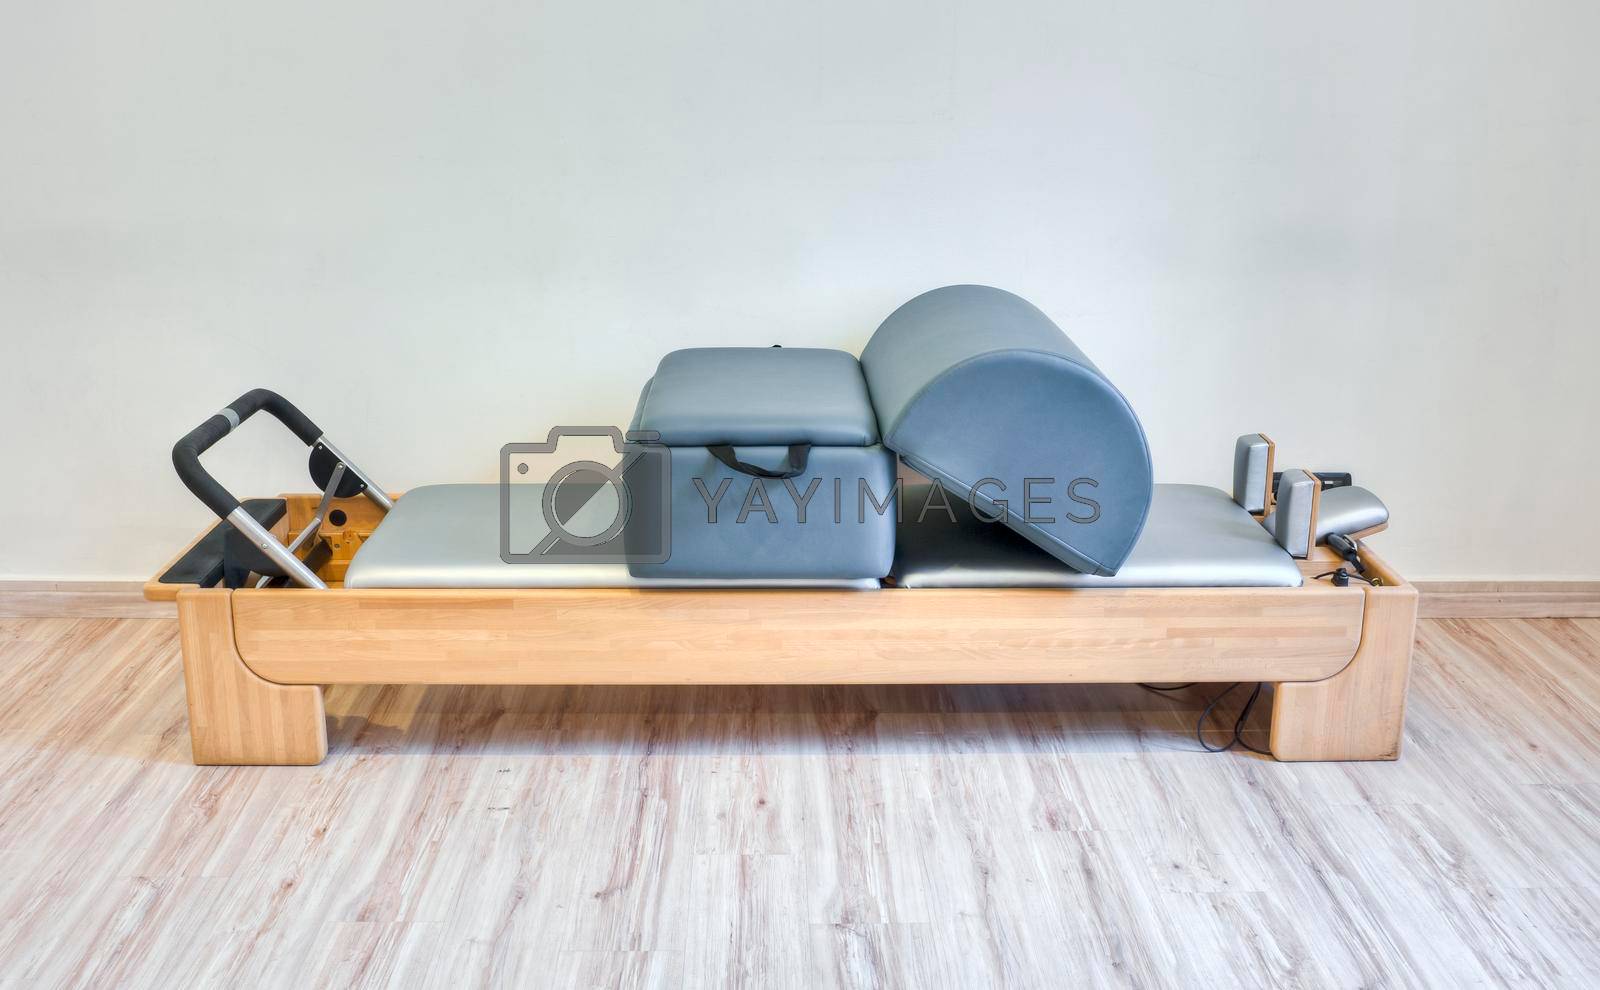 Royalty free image of Pilates fitness machine in a gym club by SimmiSimons